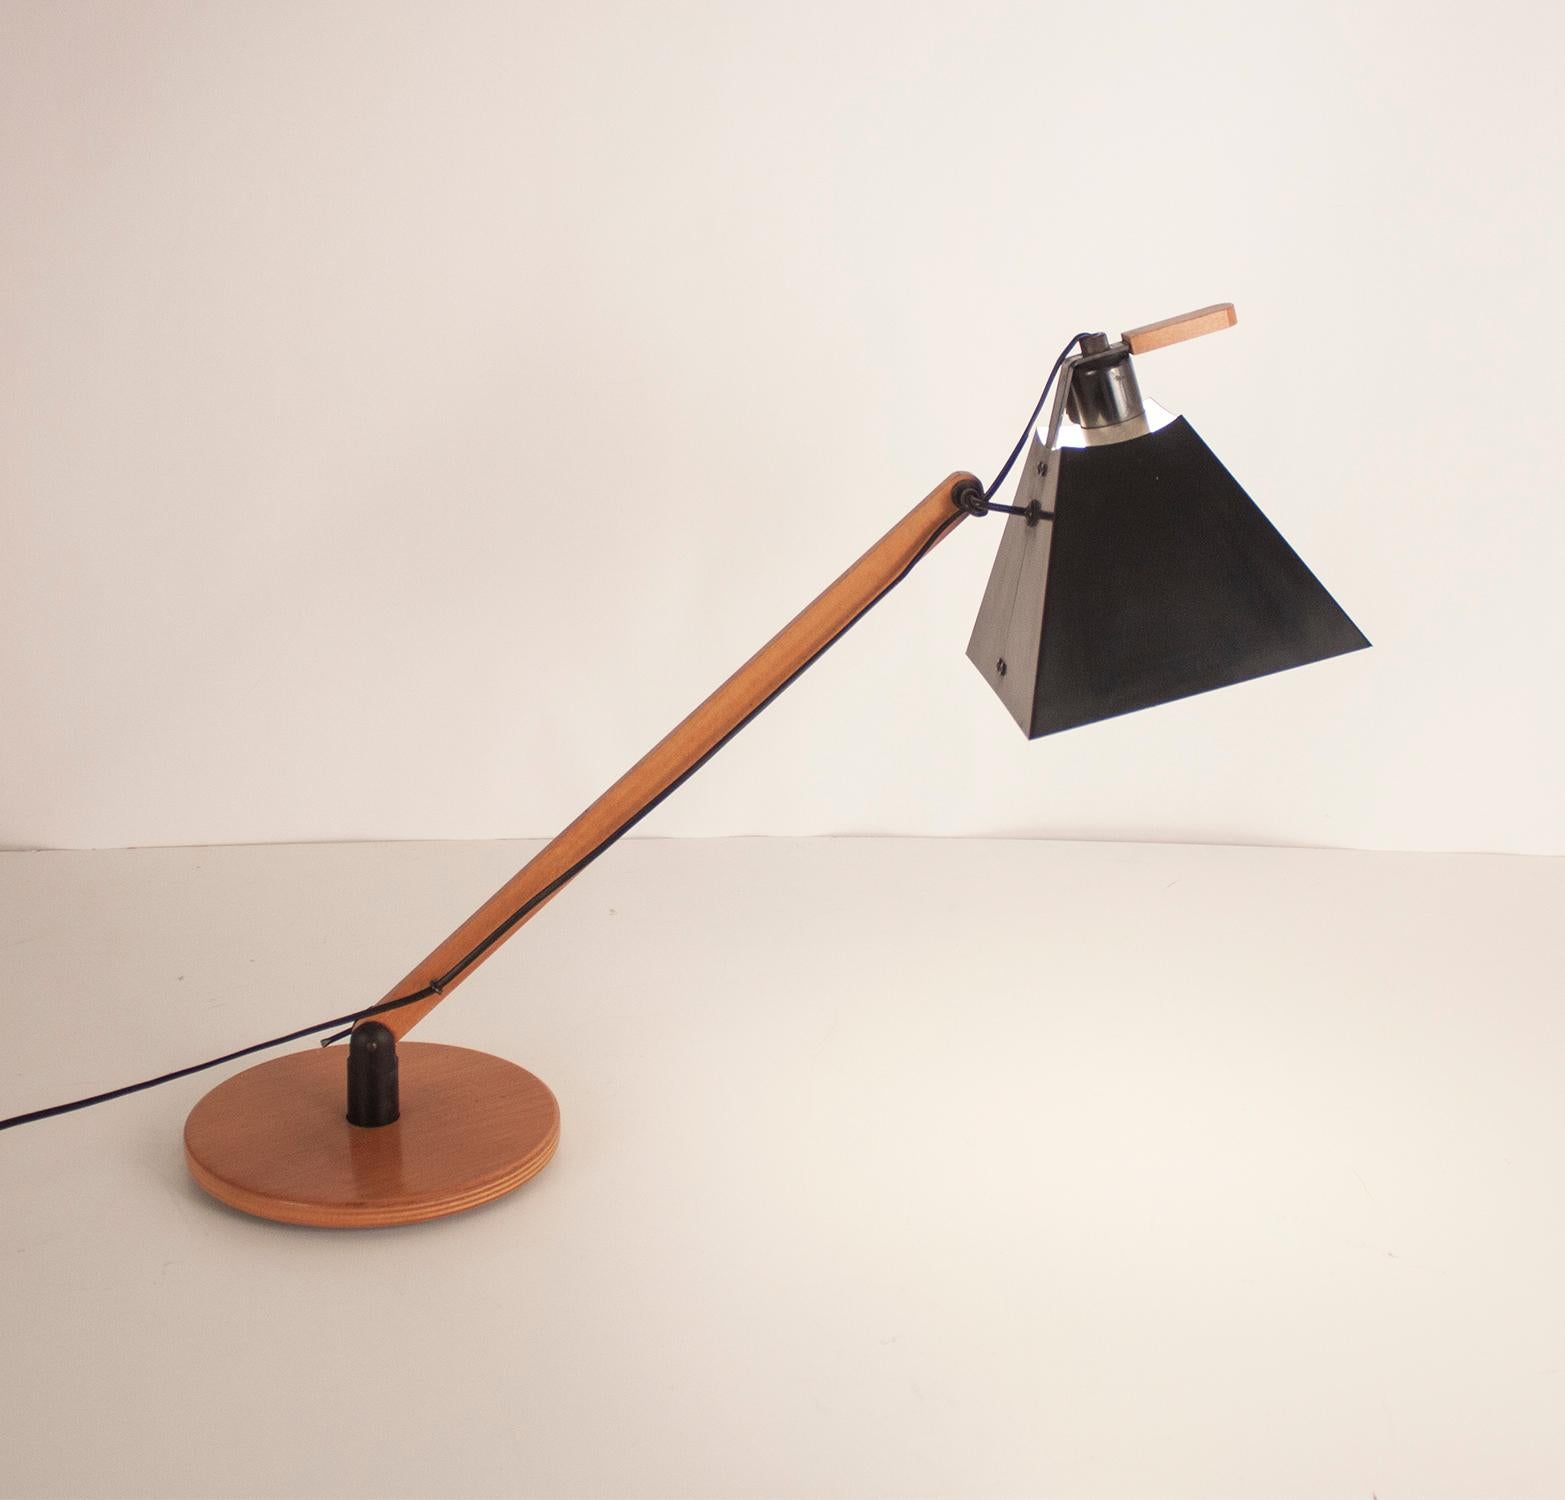 In 1974 the Barcelona designers Gemma Bernal and Ramón Isern designed this innovative system of lamps edited by Tramo.

In this tabletop version, a square-conical shade in black lacquered aluminum is attached to a circular base through an adjustable